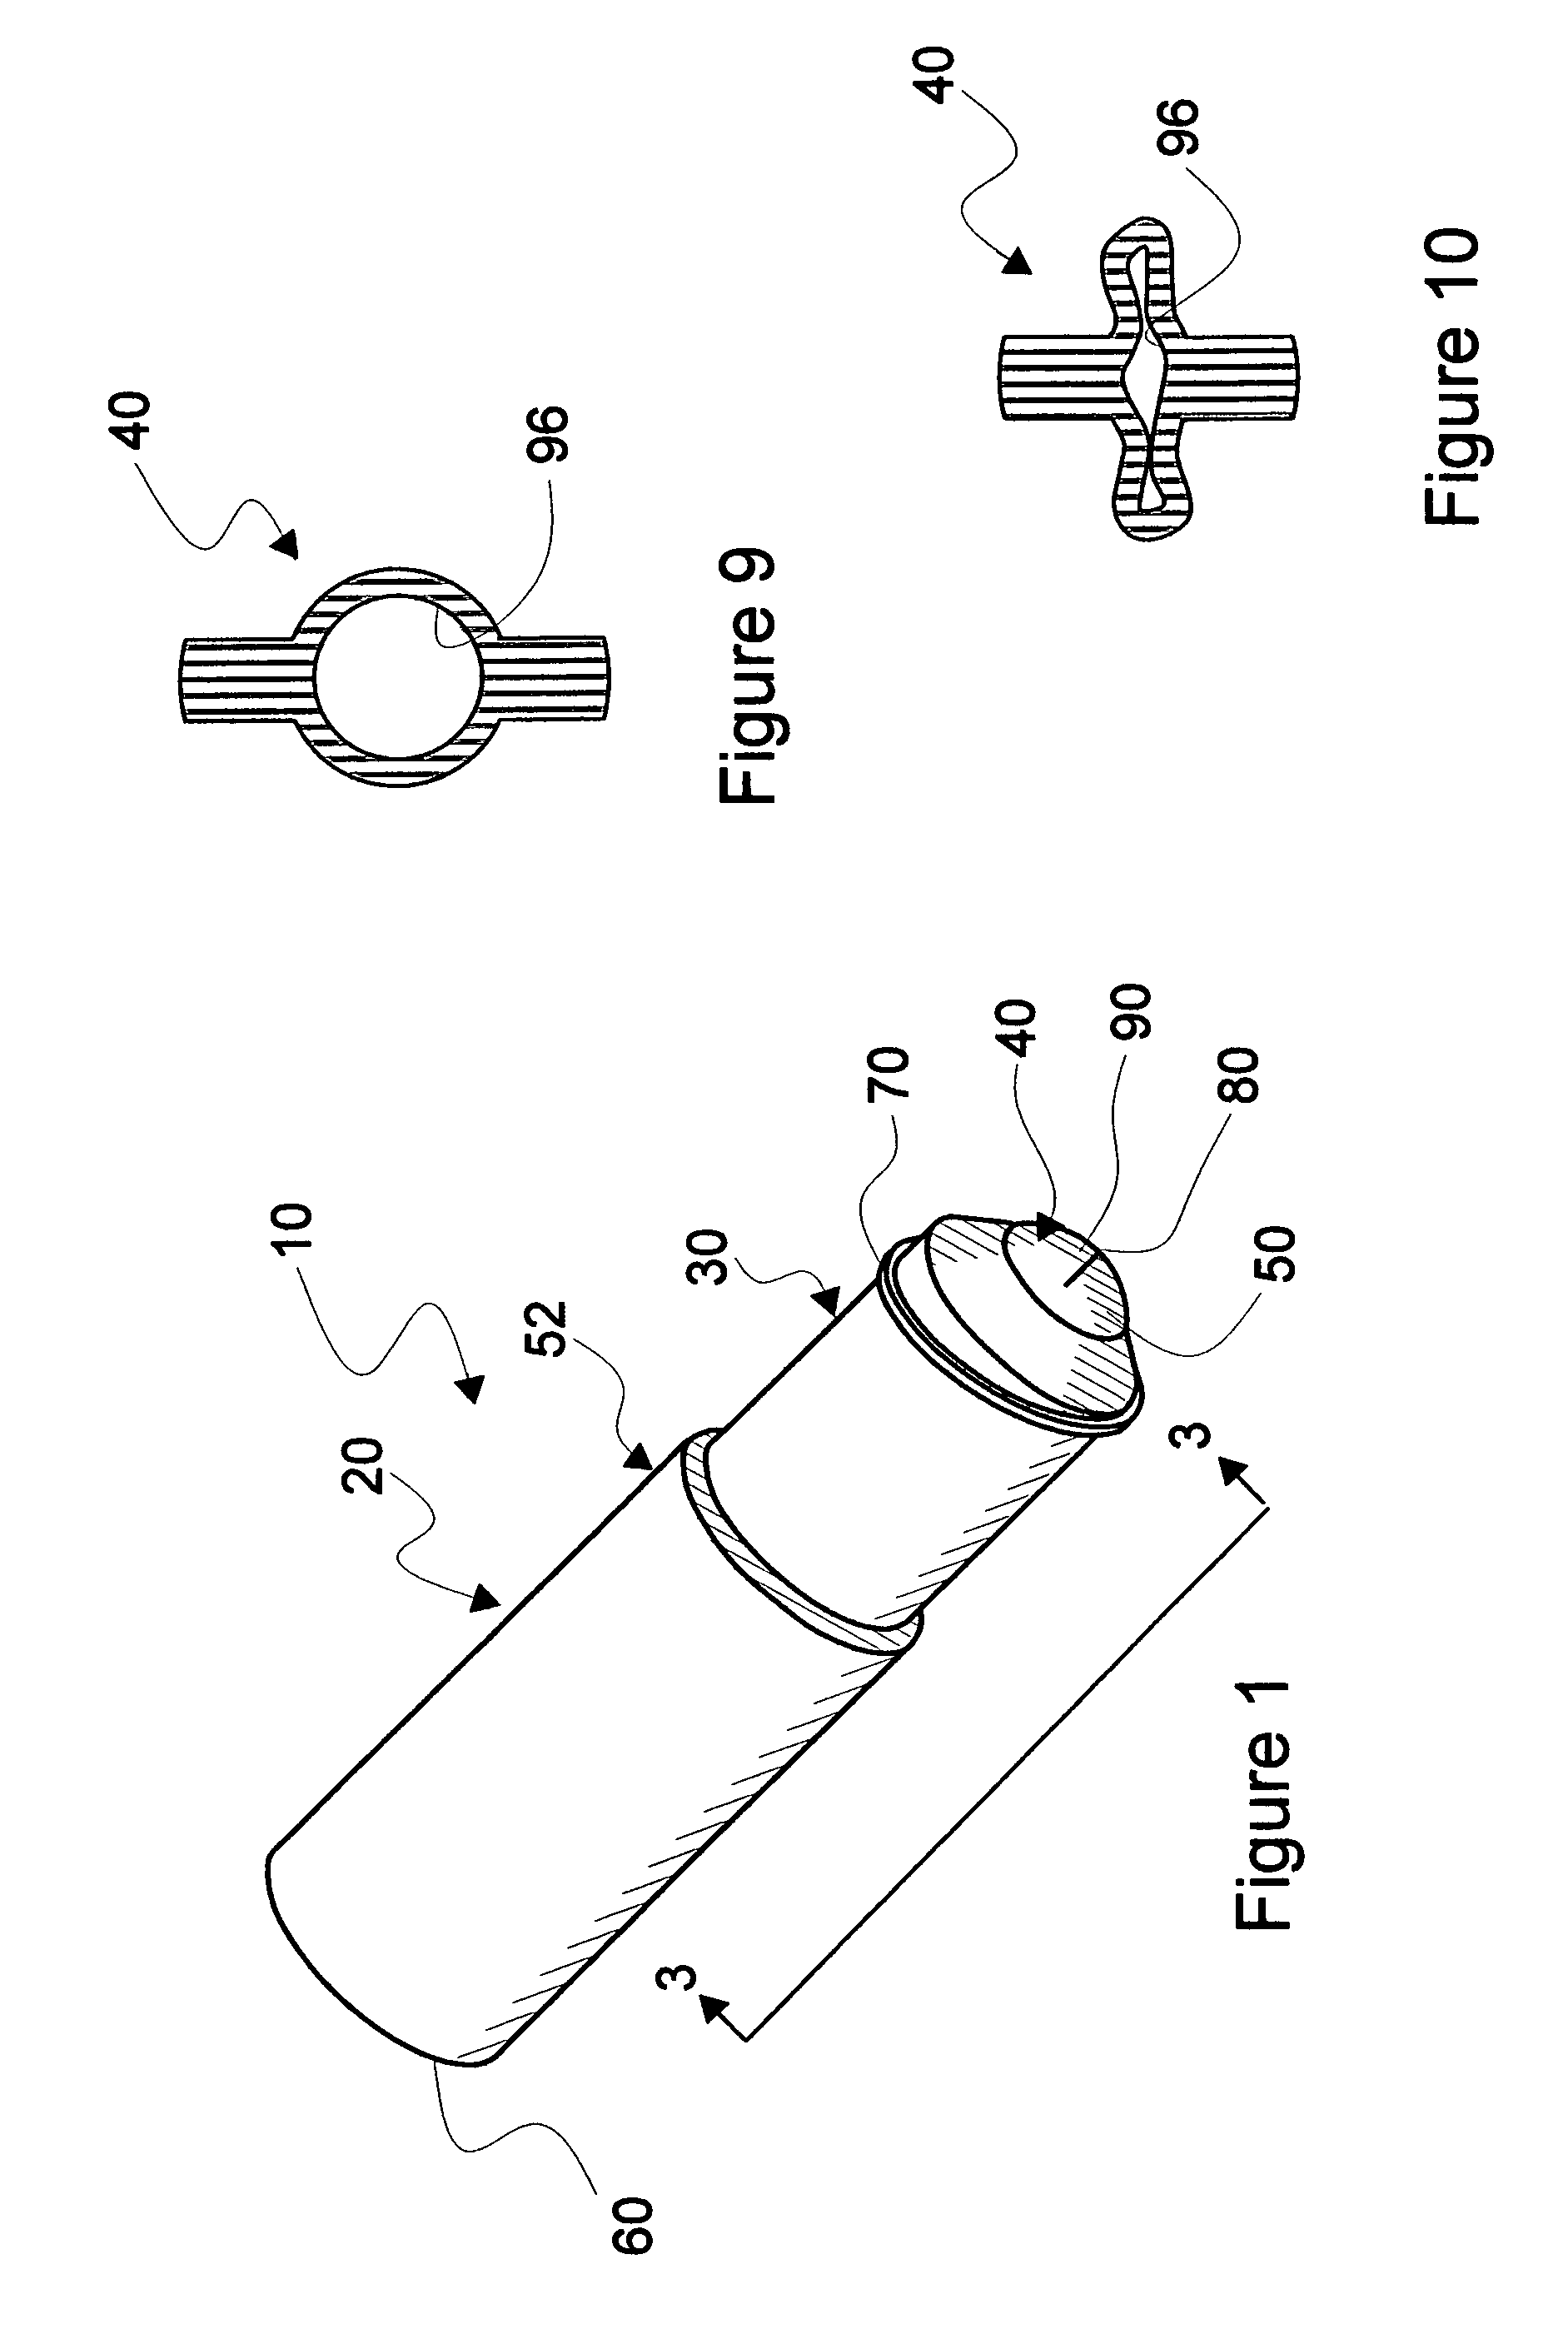 Needle-free medical connector